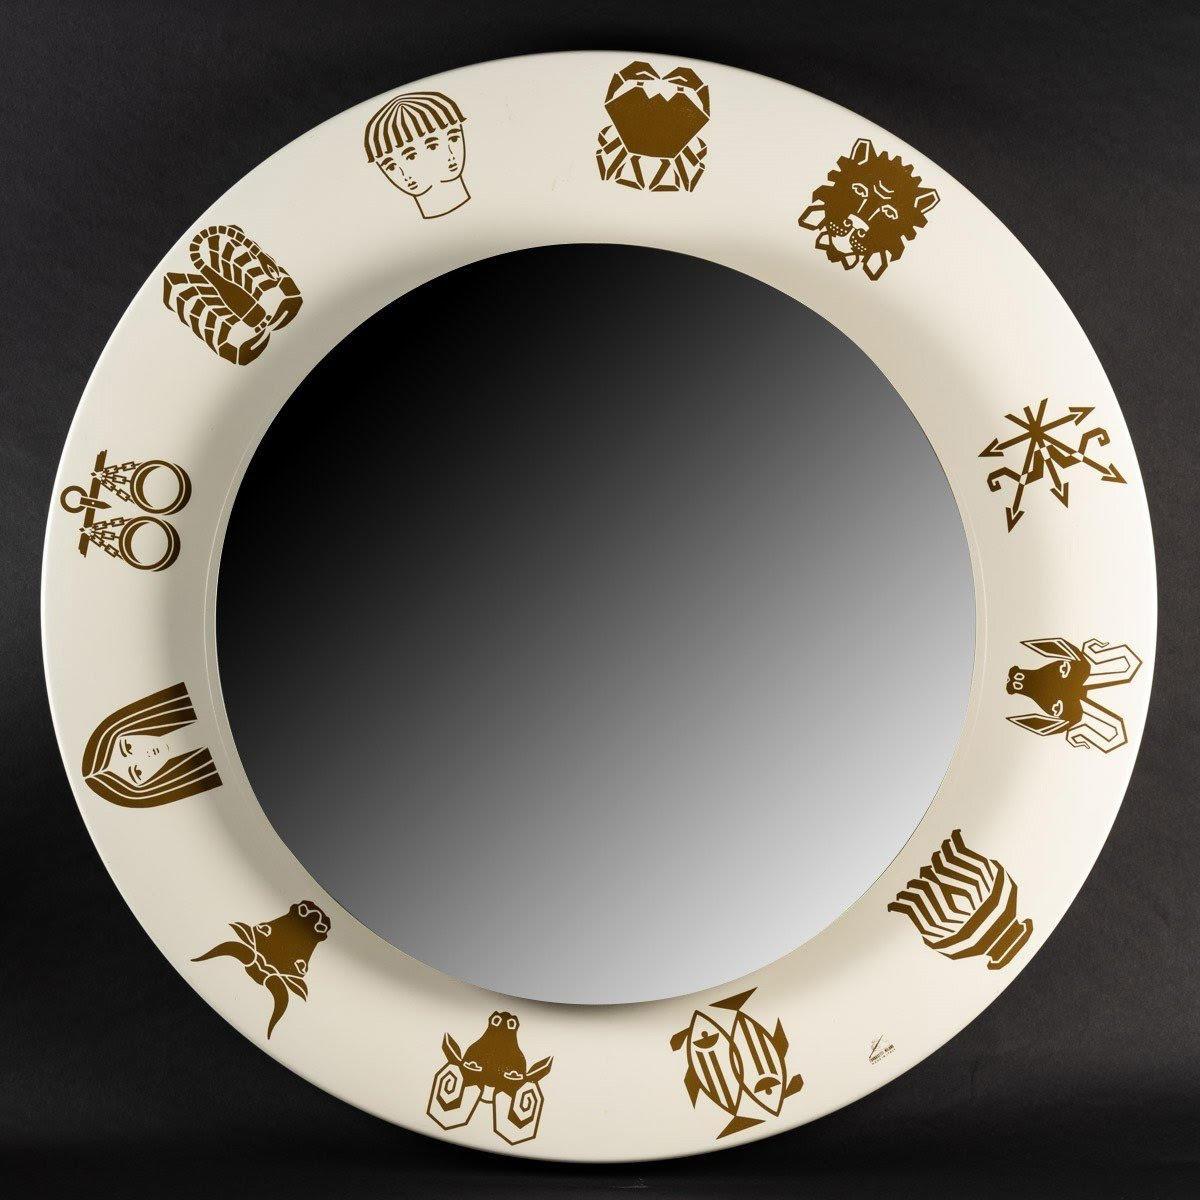 Pair of illuminated mirrors by Benedetto Fornasetti, Circa 1970.

Pair of mirrors by designer Benedetto Fornasetti, illuminated mirrors in white and gold lacquered metal decorated with the twelve signs of the Zodiac, circa 1970.
d: 80cm, d: 13cm